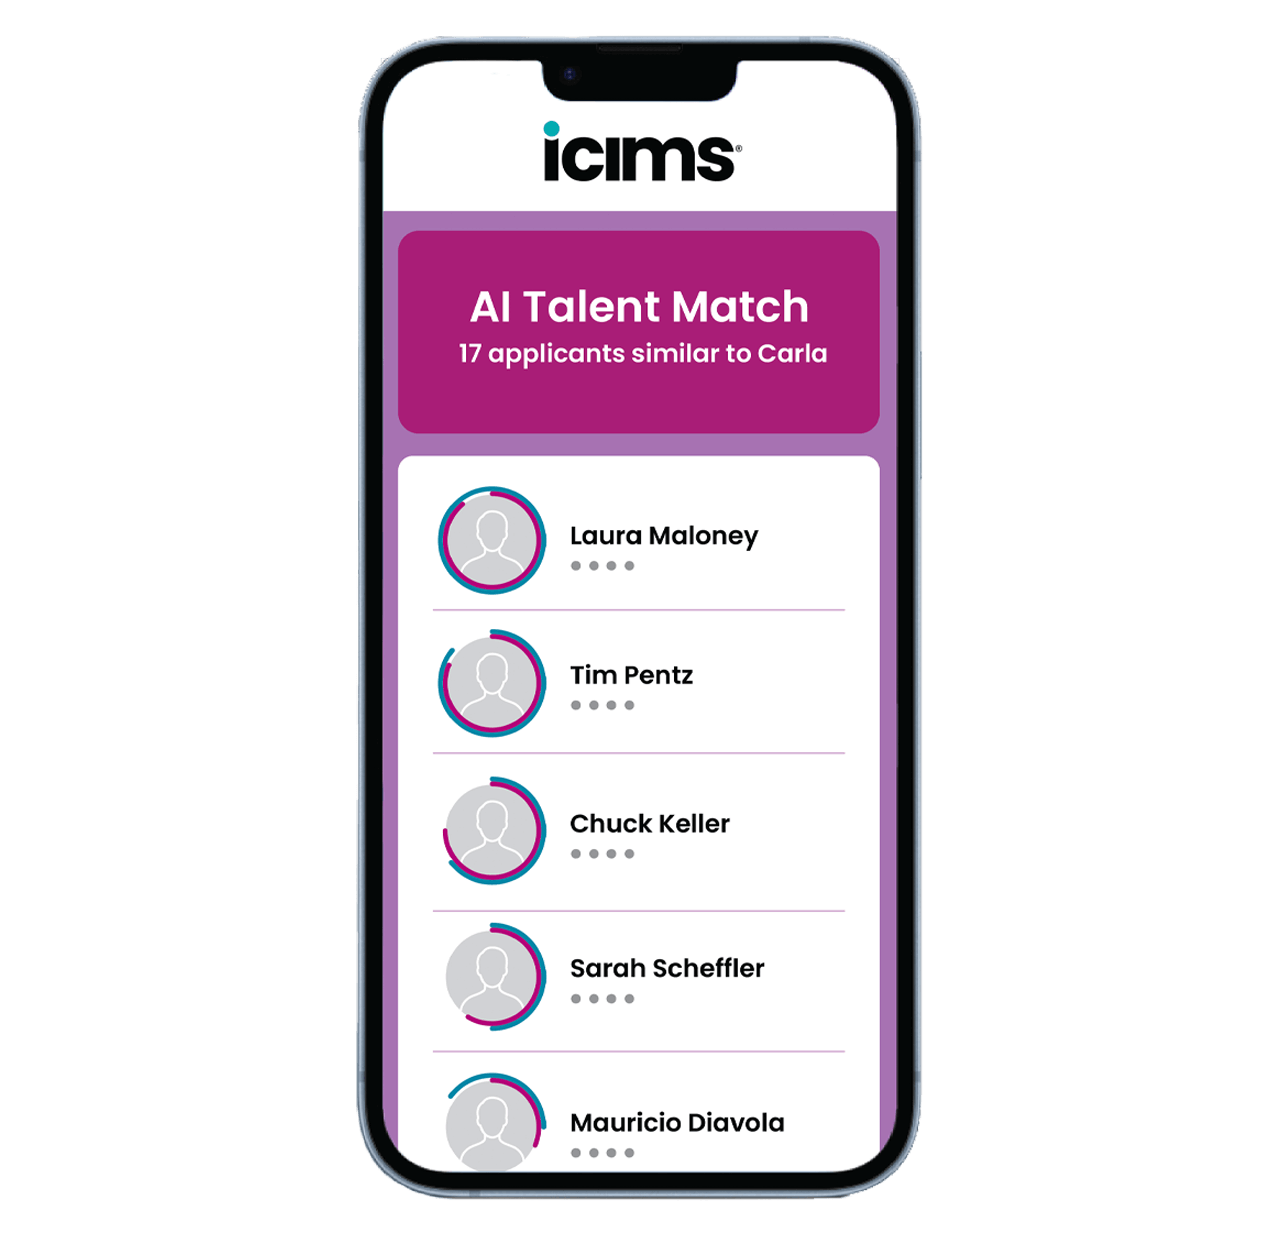 Rendering of a smartphone displaying a list of candidates discovered using iCIMS' AI Talent Match functionality